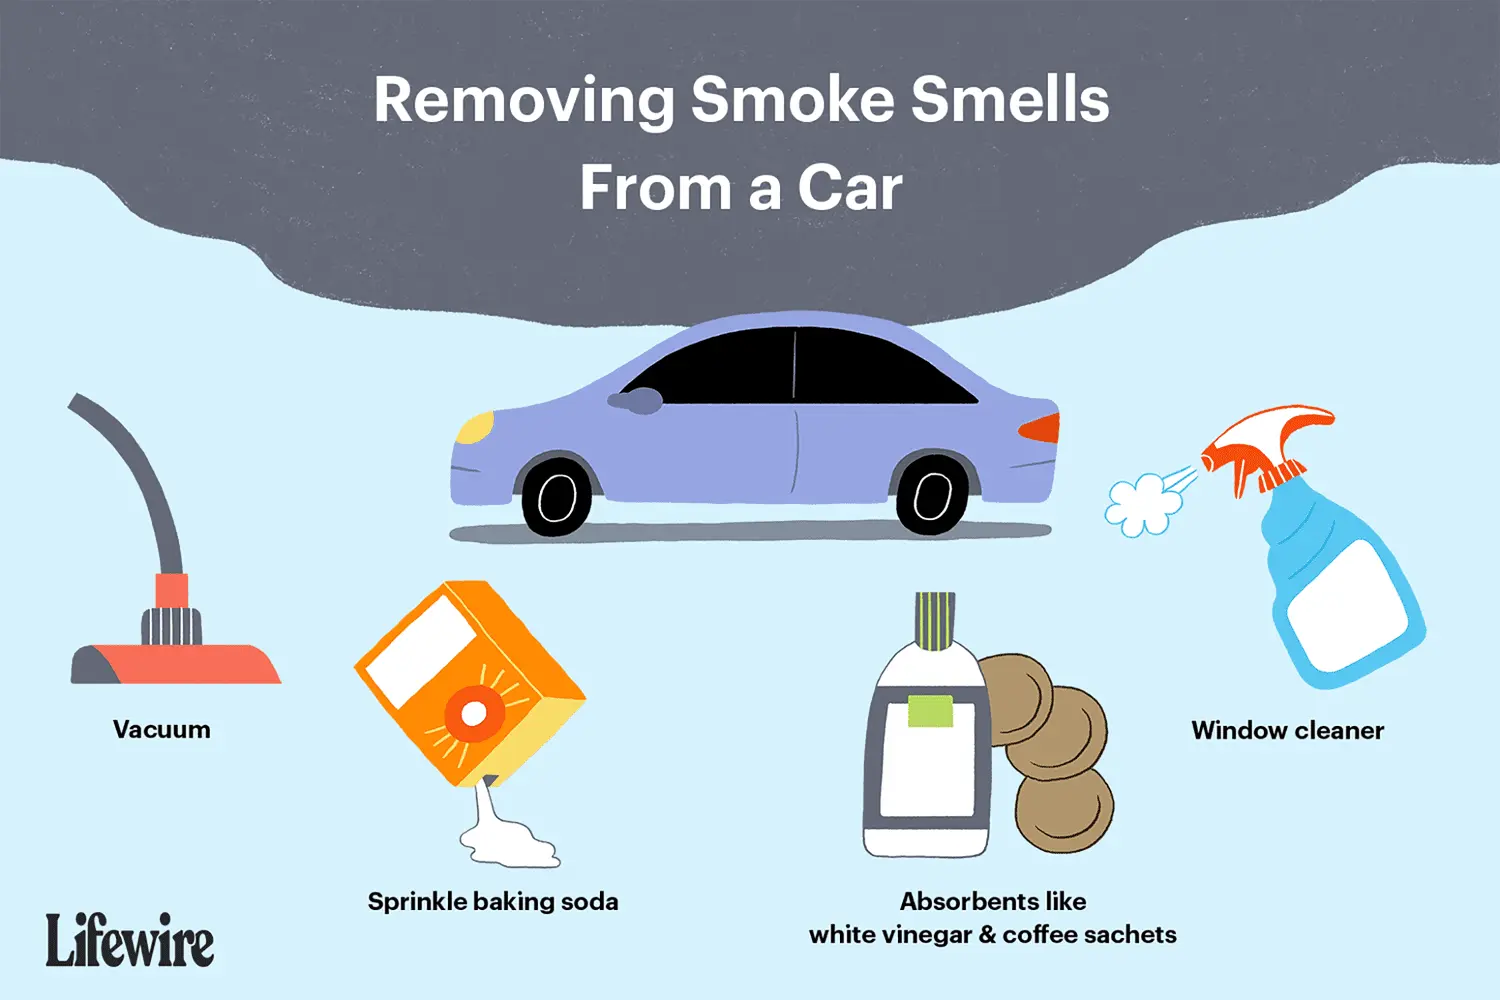 how to clean a car that has been smoked in - How do you get cigarette smoke stains out of a car